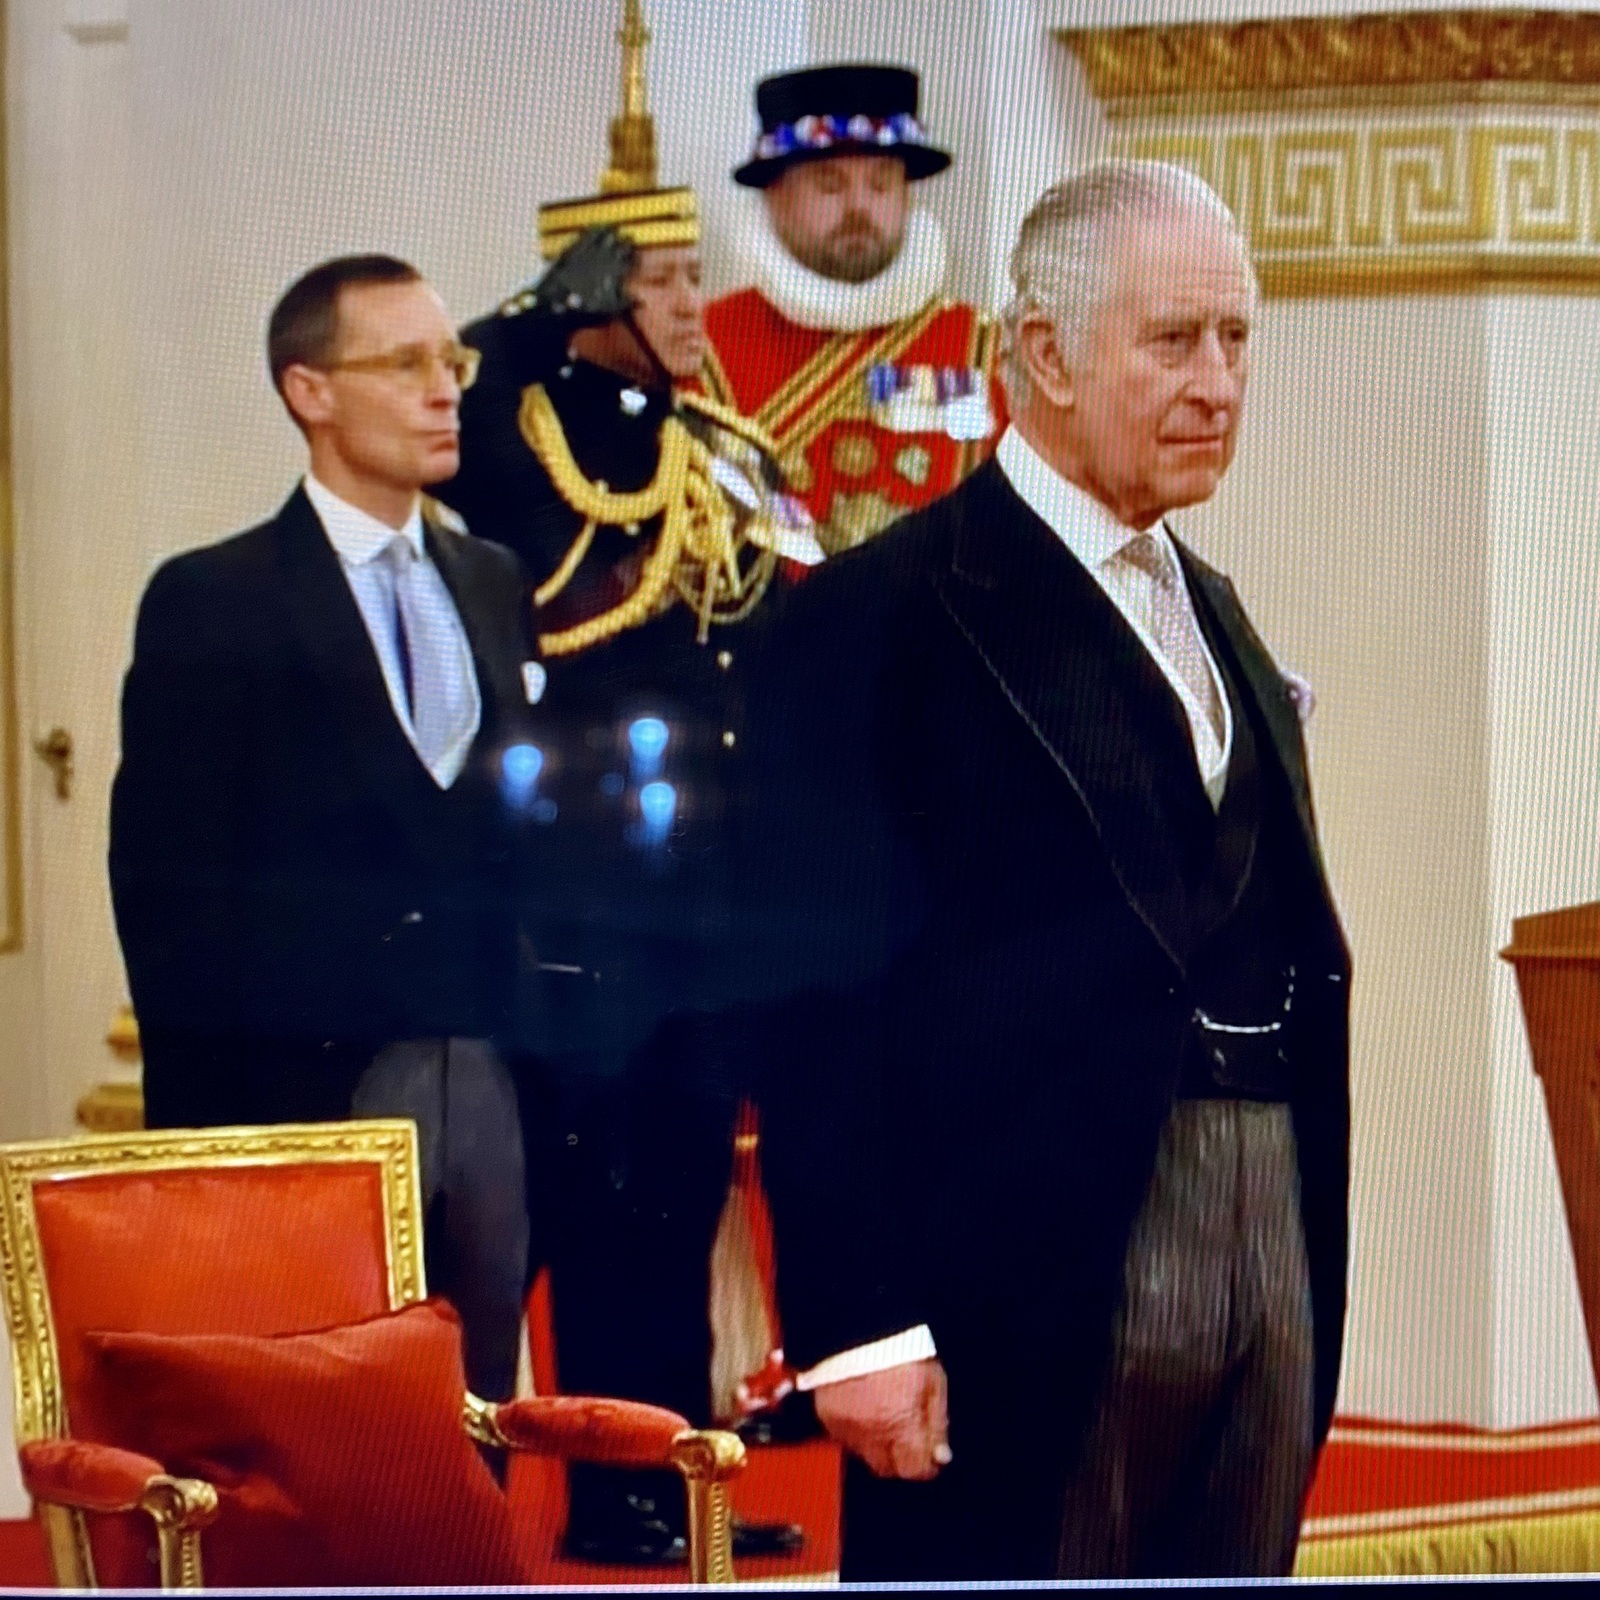 9 Mar 23 - Presentation of Loyal Addresses  Honoured to attend on The Lord Mayor as he made The City’s Loyal Address to HM The King at Buckingham Palace, exercising our right to do so as one of the 27 Privileged Bodies who have a key role in British Society. 